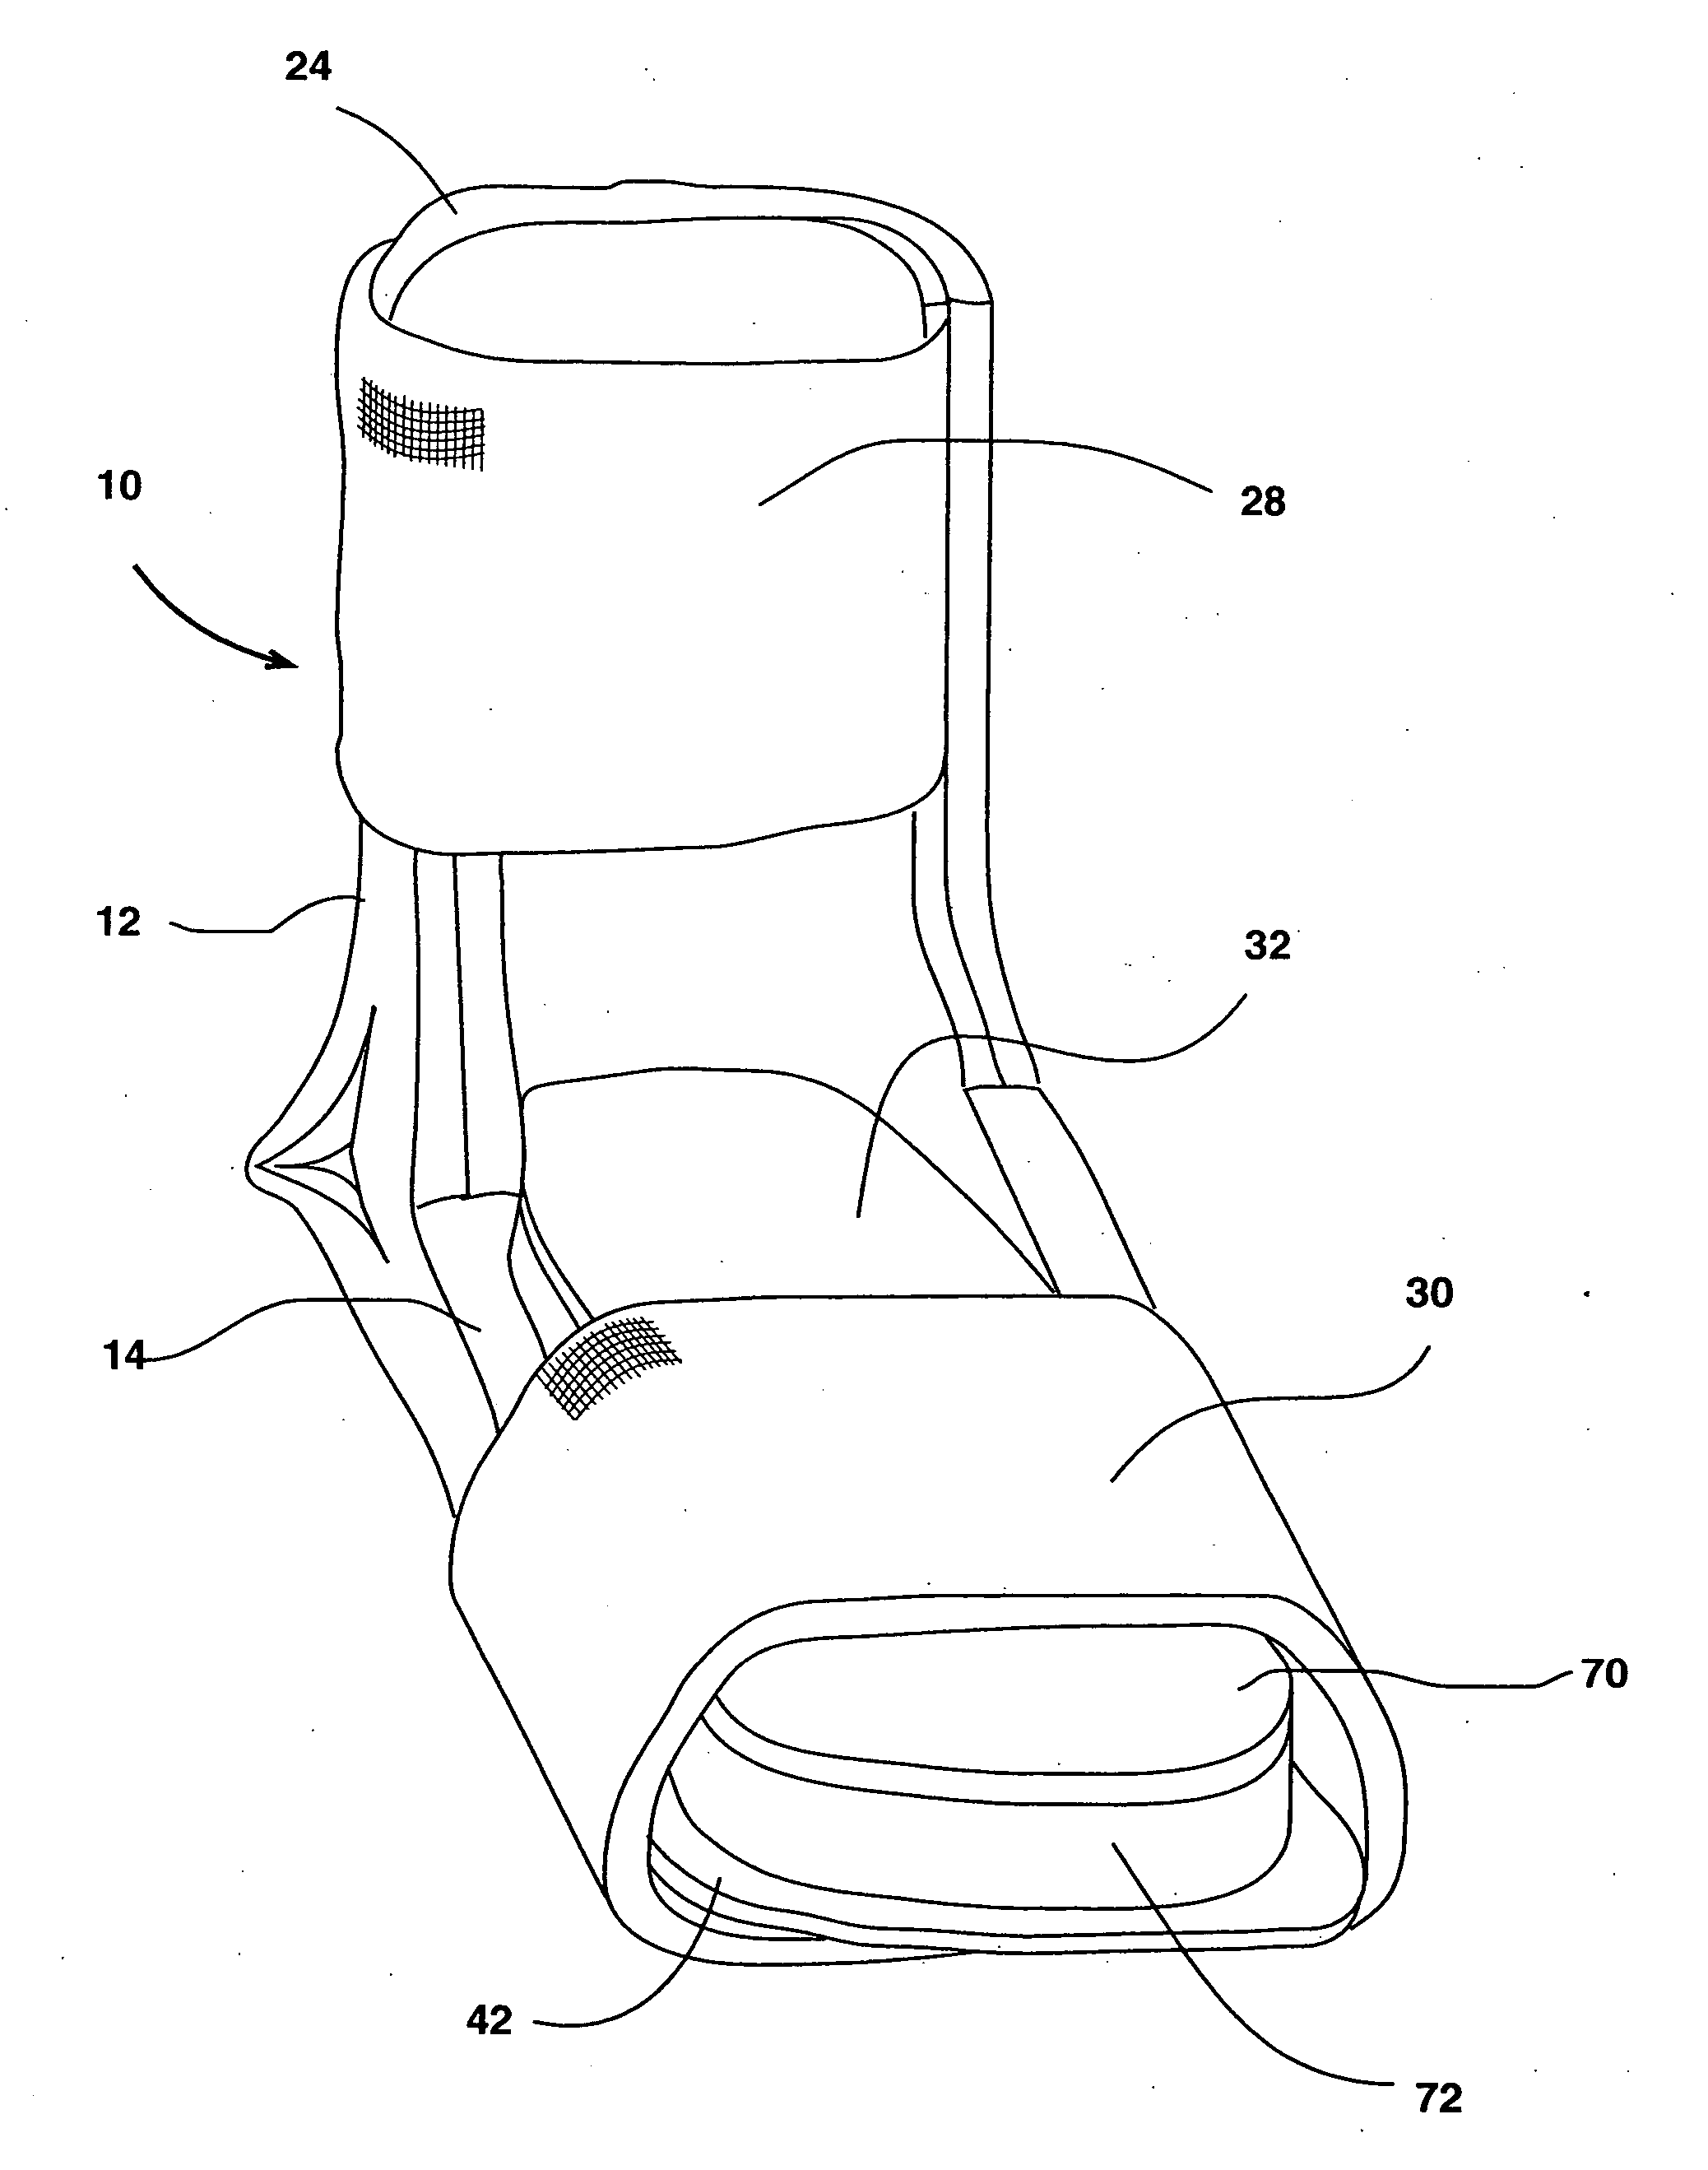 Variously adjustable night splint with adjustable spacers and lock-out hinge